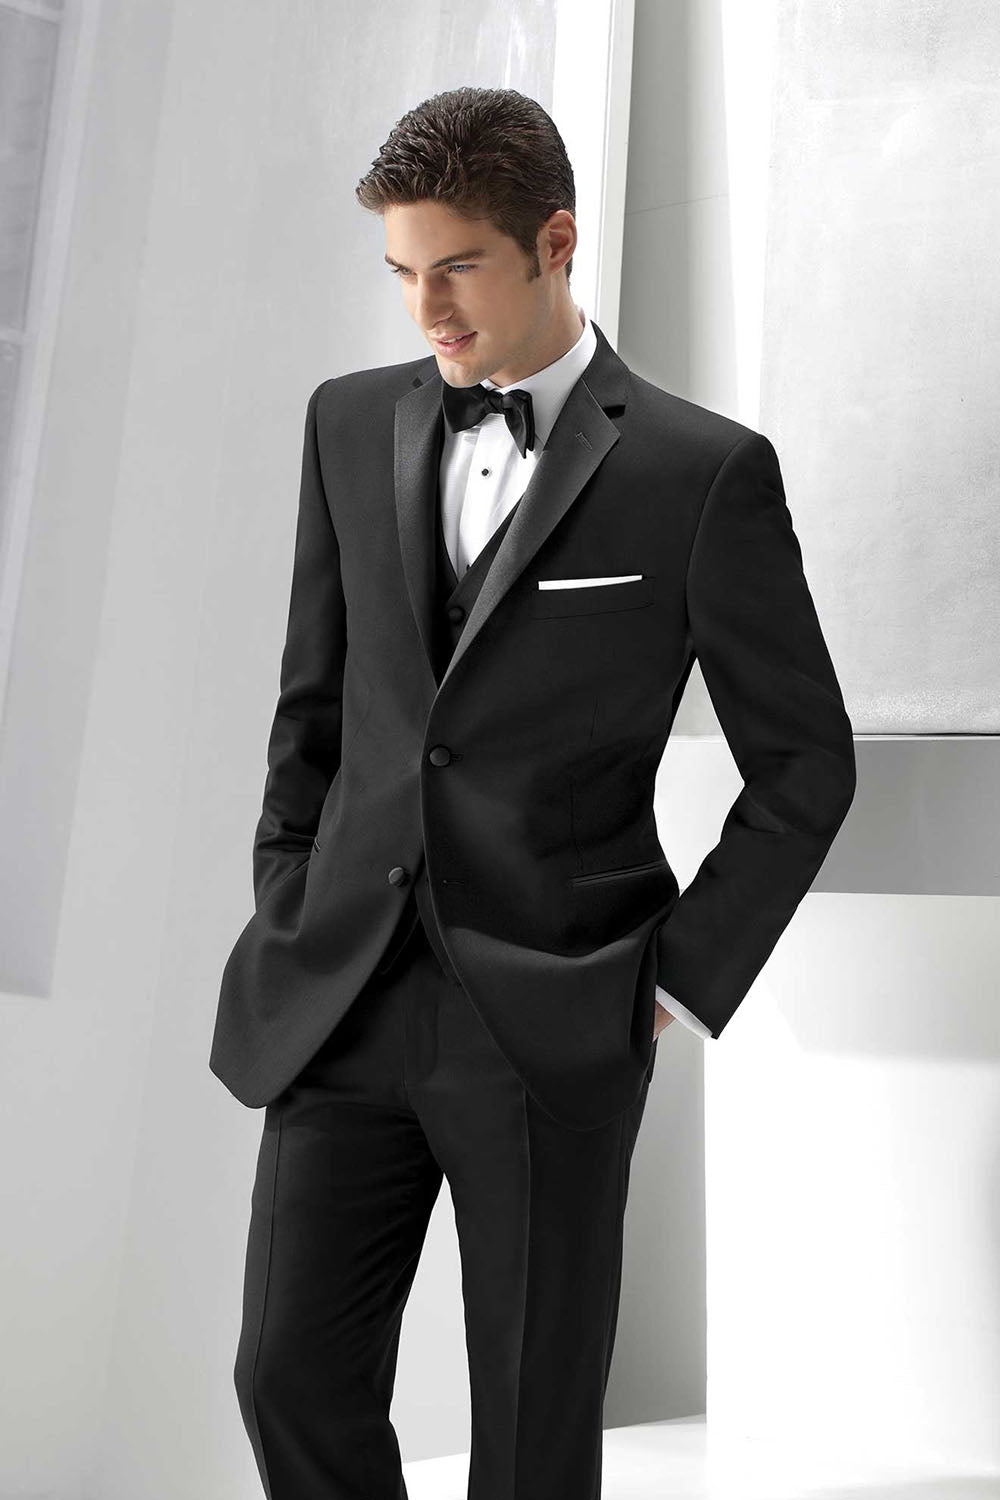 Crystal Beaded Black Velvet Mens Slim Fit Suit For Weddings And Parties Black  Tuxedo For Groom Costume Homme Masculino 221202 From Luo03, $85.02 |  DHgate.Com